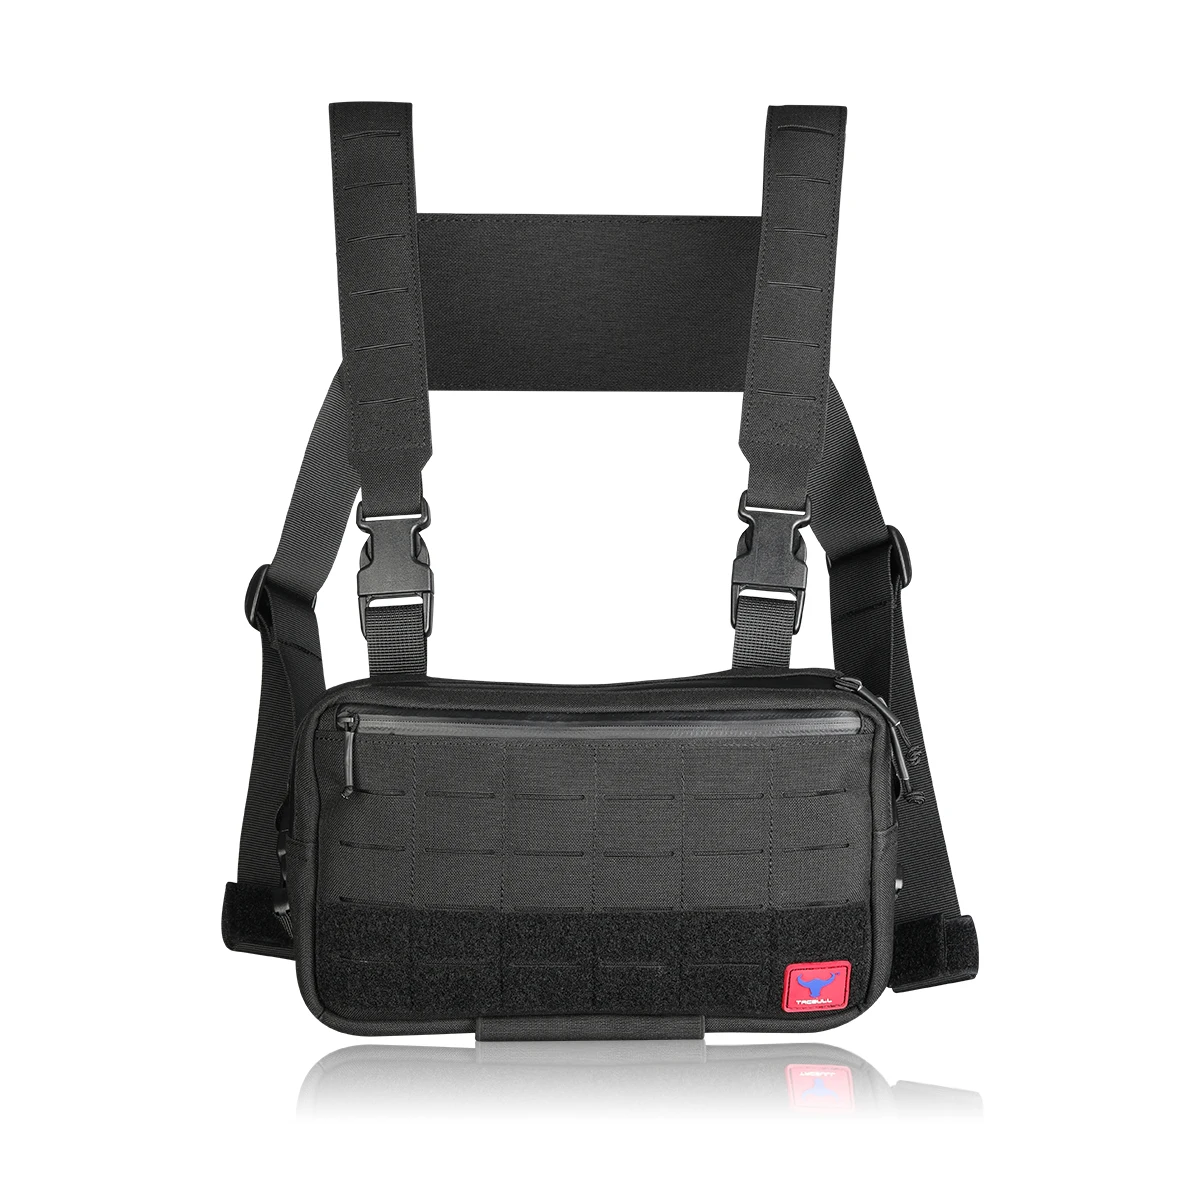 Cytac Tactical Plate Carrier Tactical Chest Rig Modular And Lightweight ...